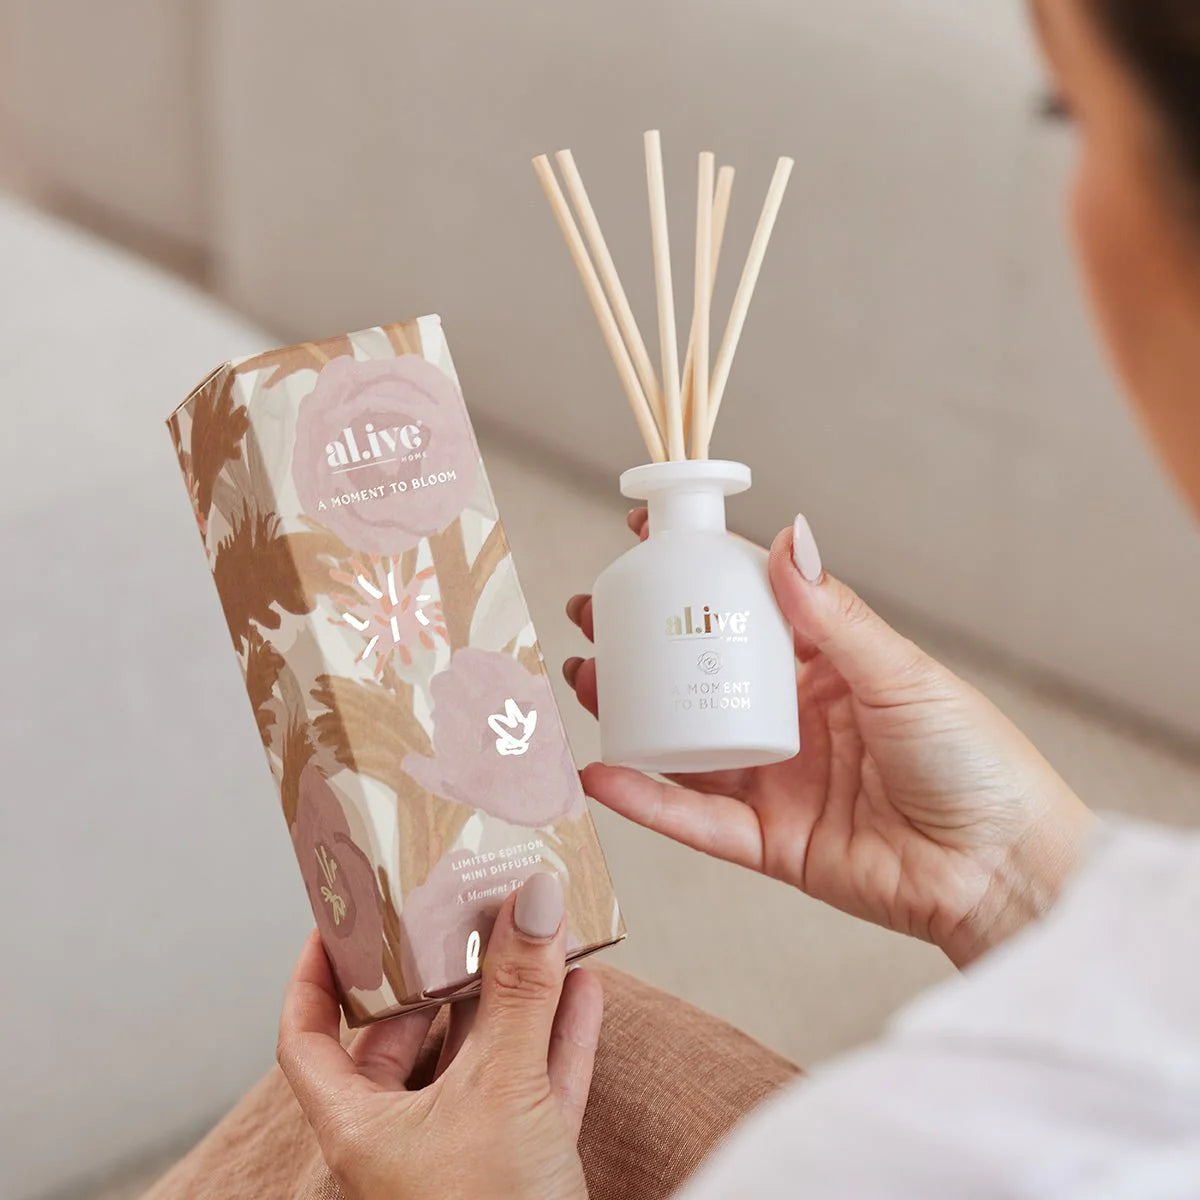 LIMITED EDITION Mini Diffuser - A Moment To Bloom